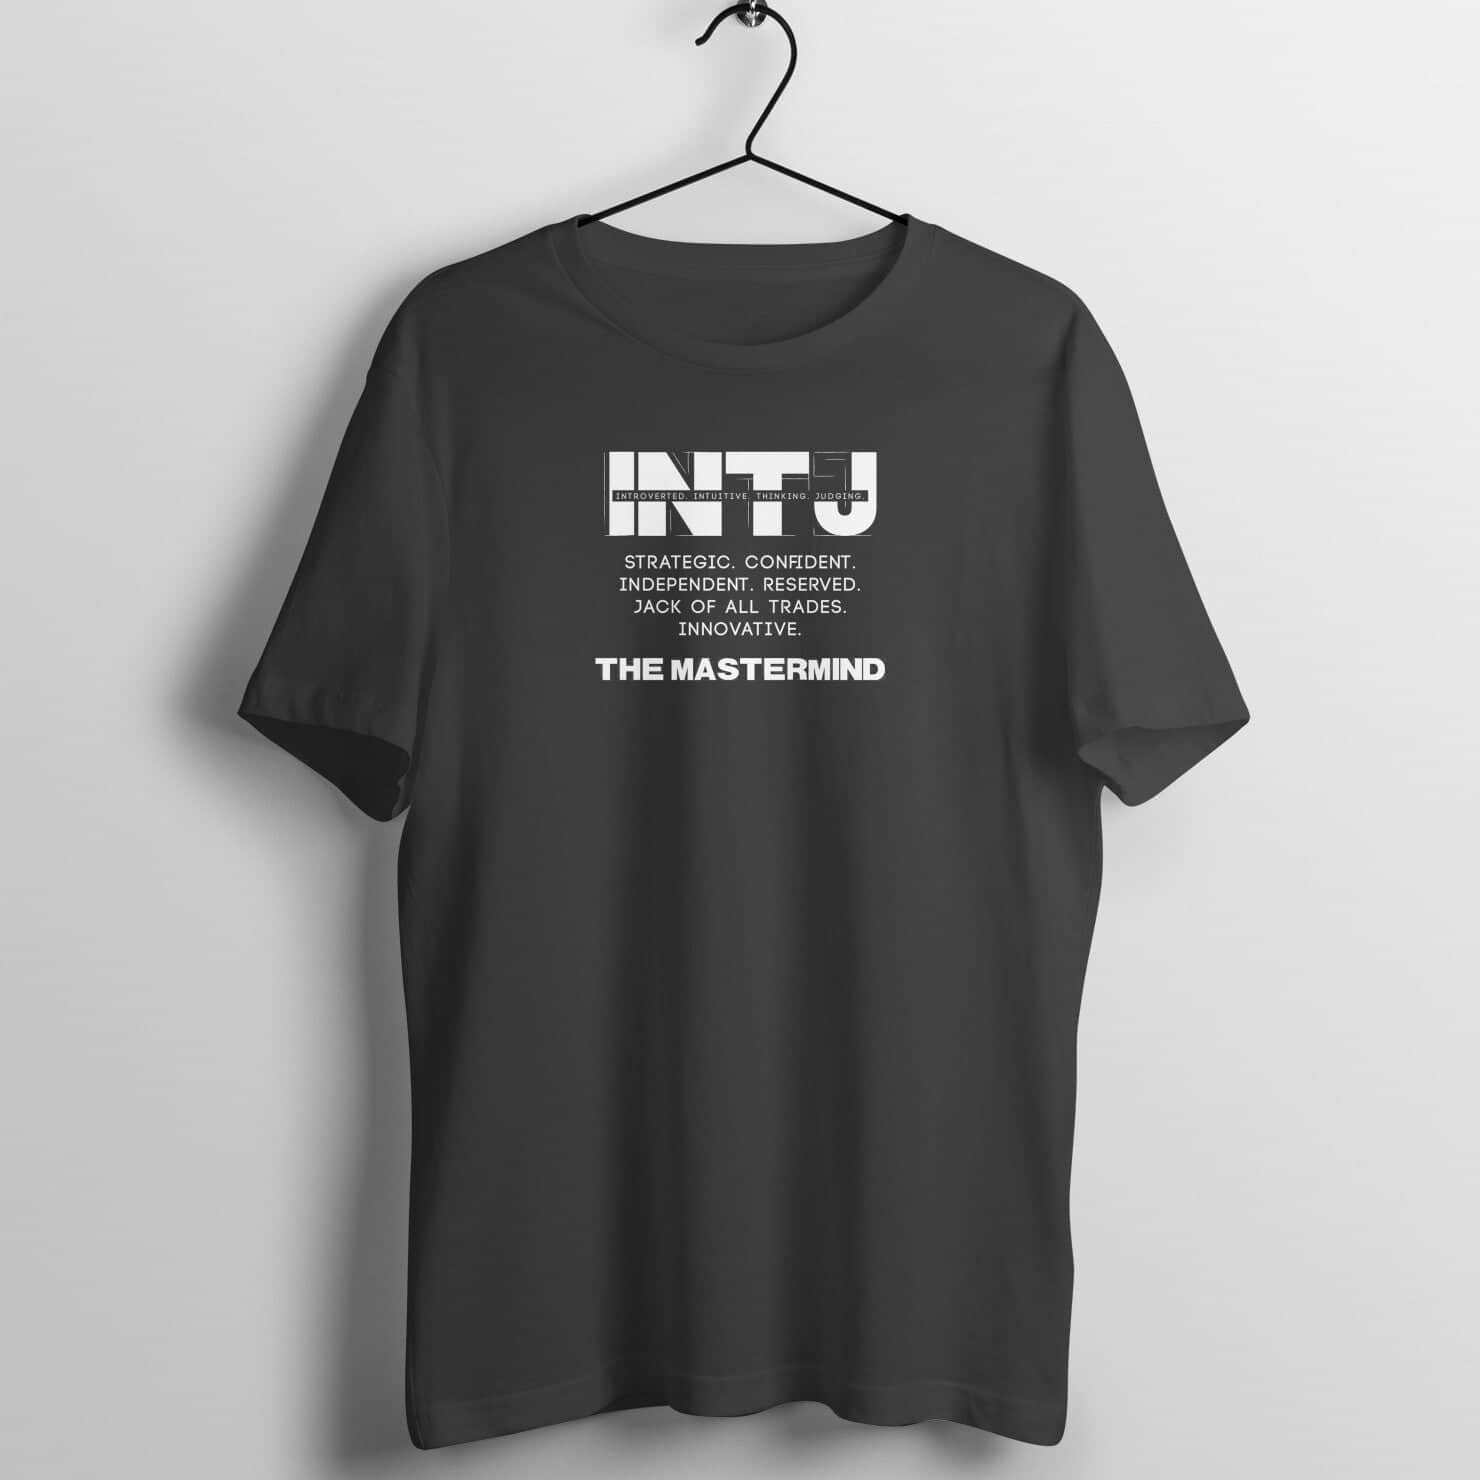 INTJ The Mastermind Exclusive Black T Shirt for Men and Women Shirts & Tops Printrove Black S 